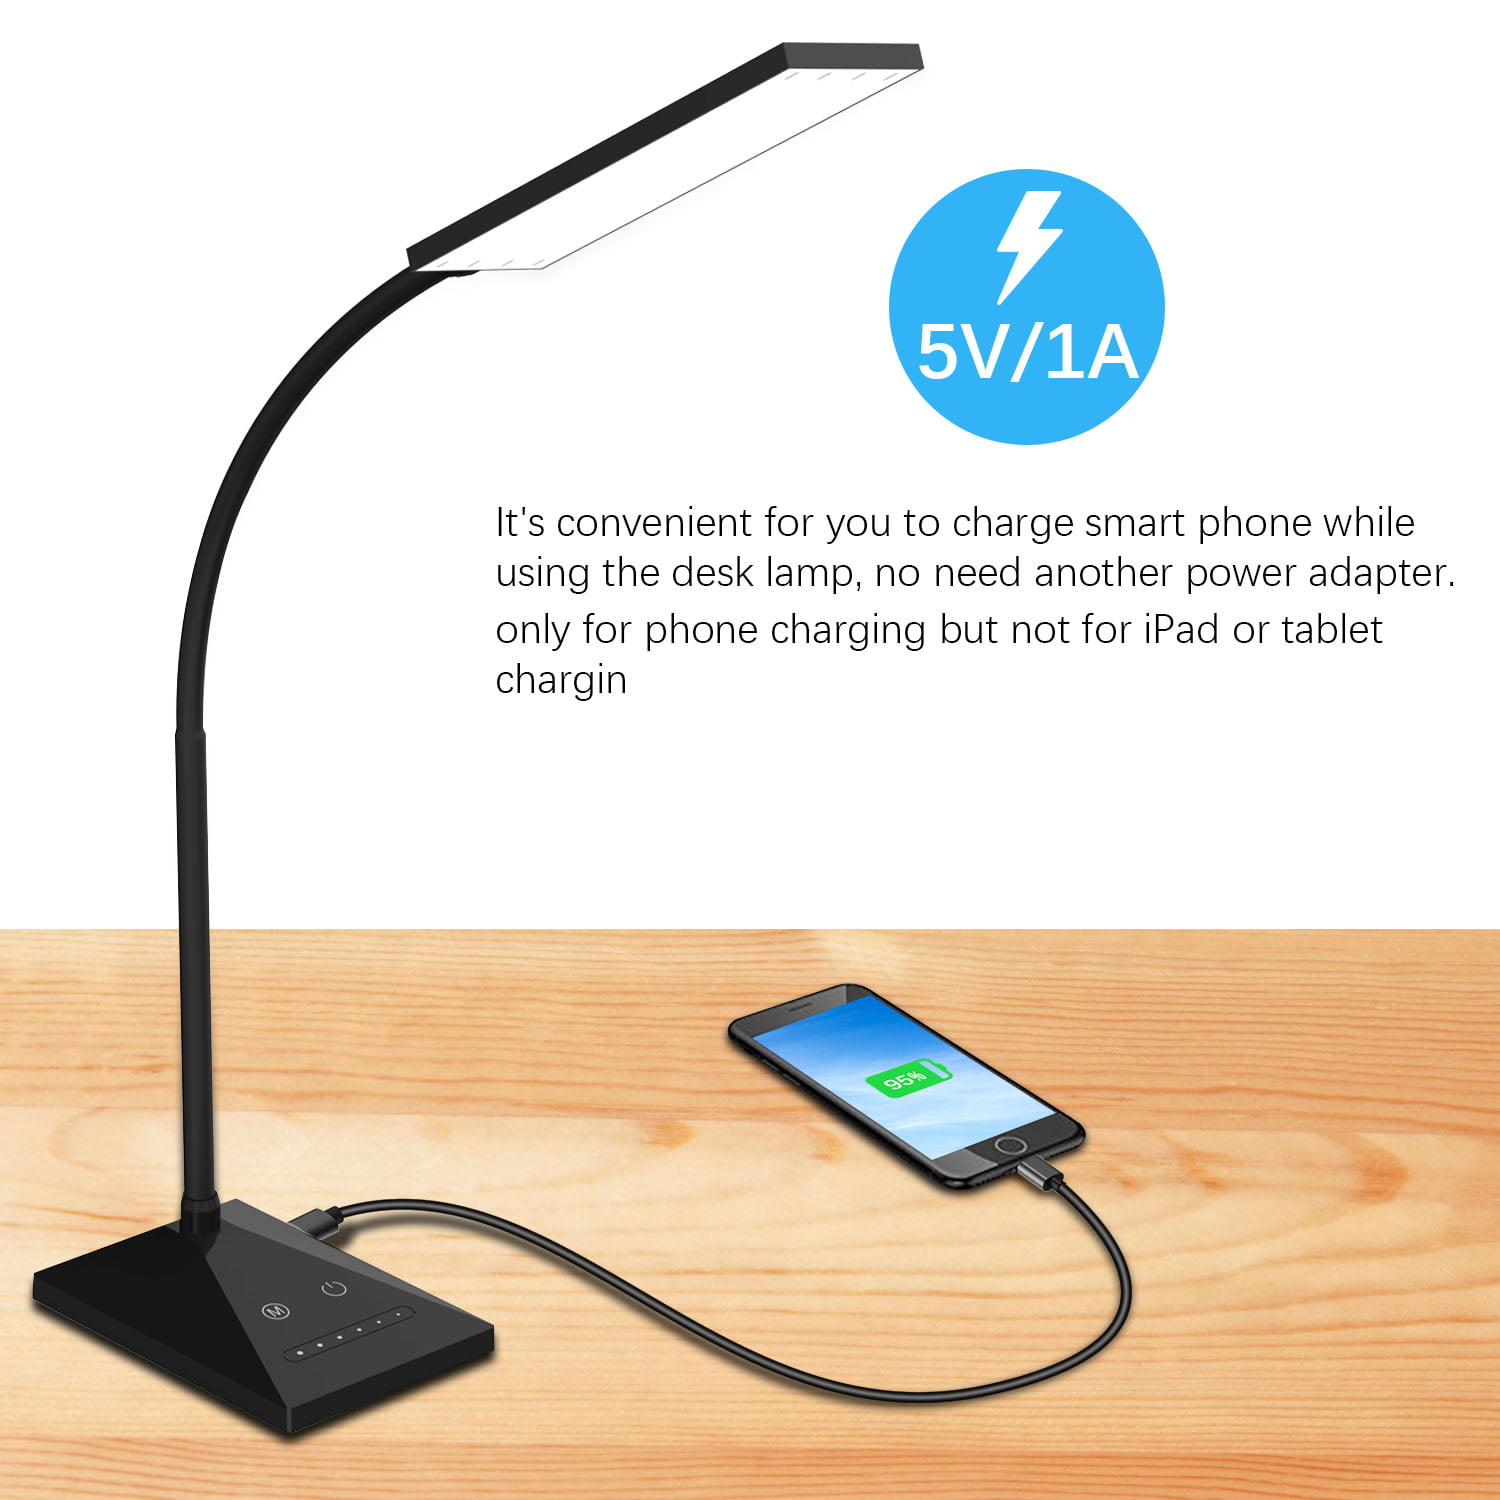 KOOTION LED Desk Lamp with USB Charging